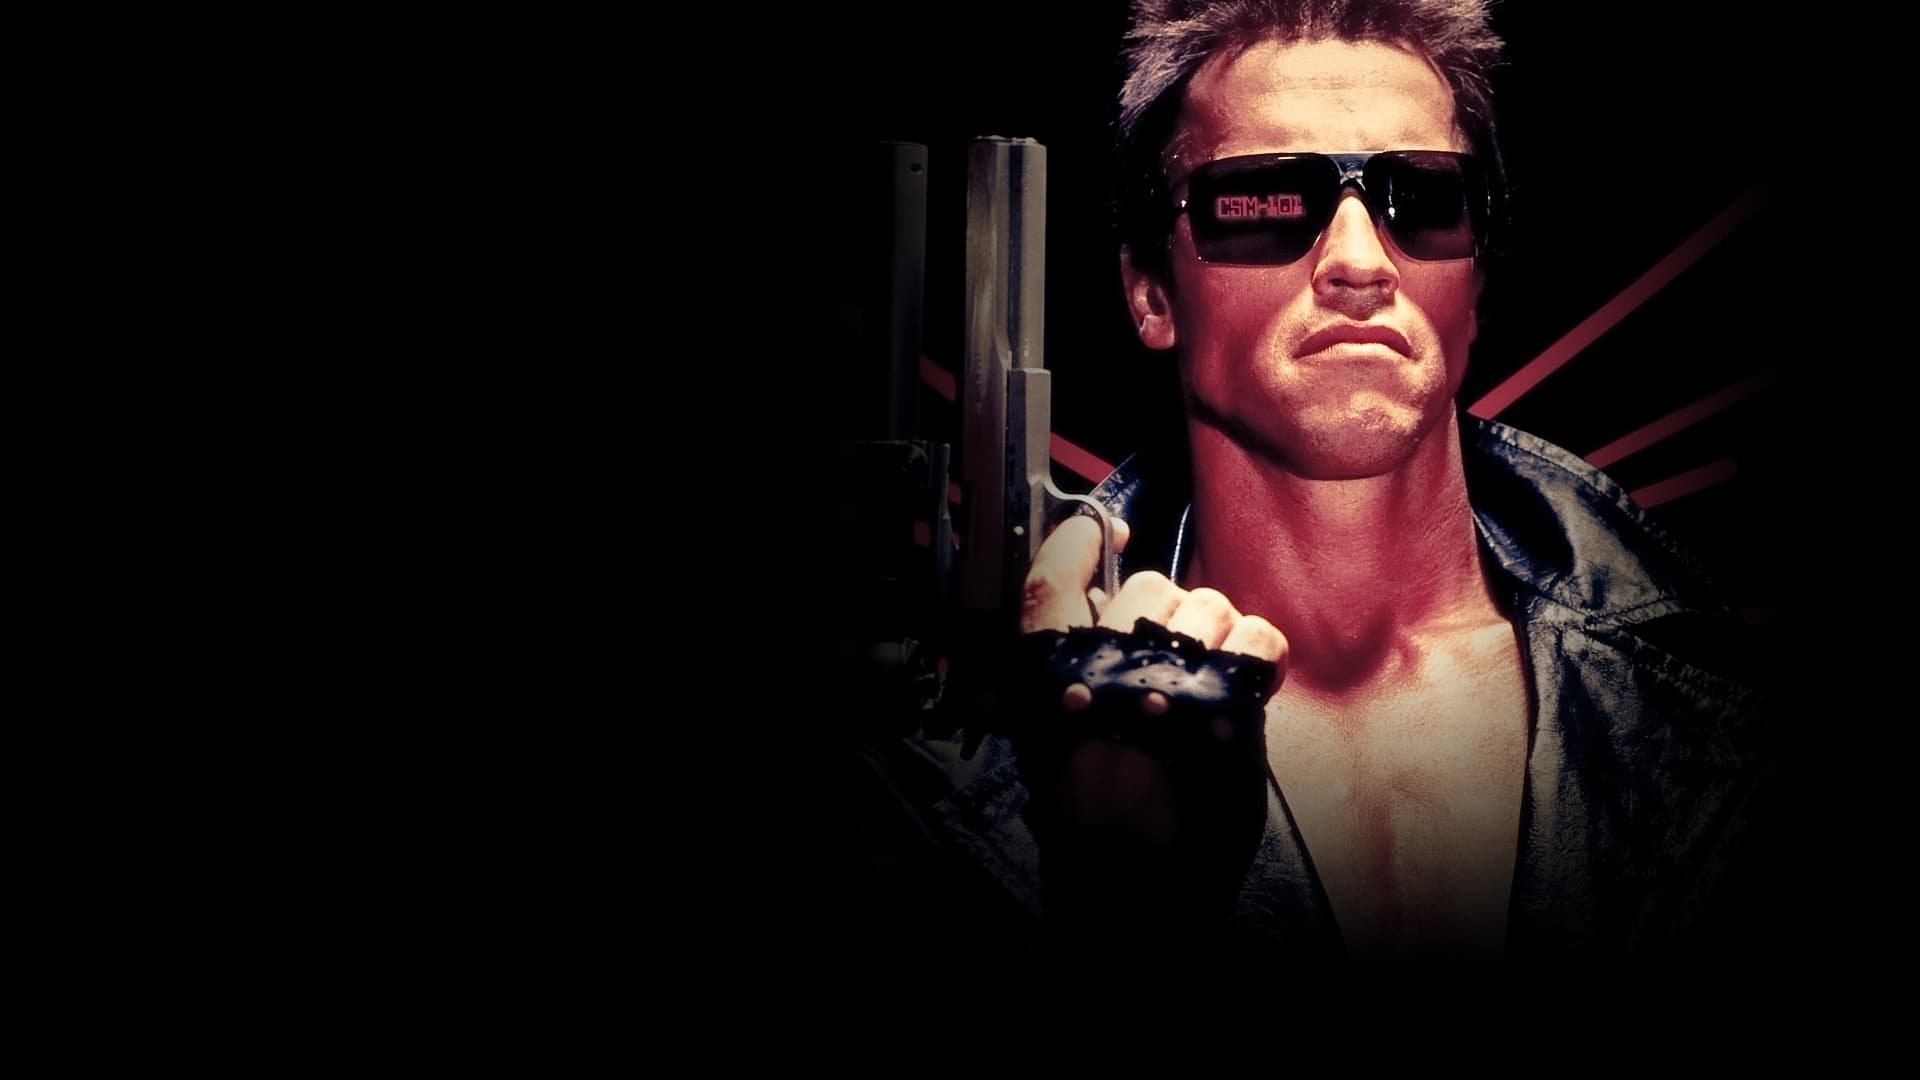 The Terminator movie, HD wallpapers and posters, 4K resolution, Cult classic film, 1920x1080 Full HD Desktop